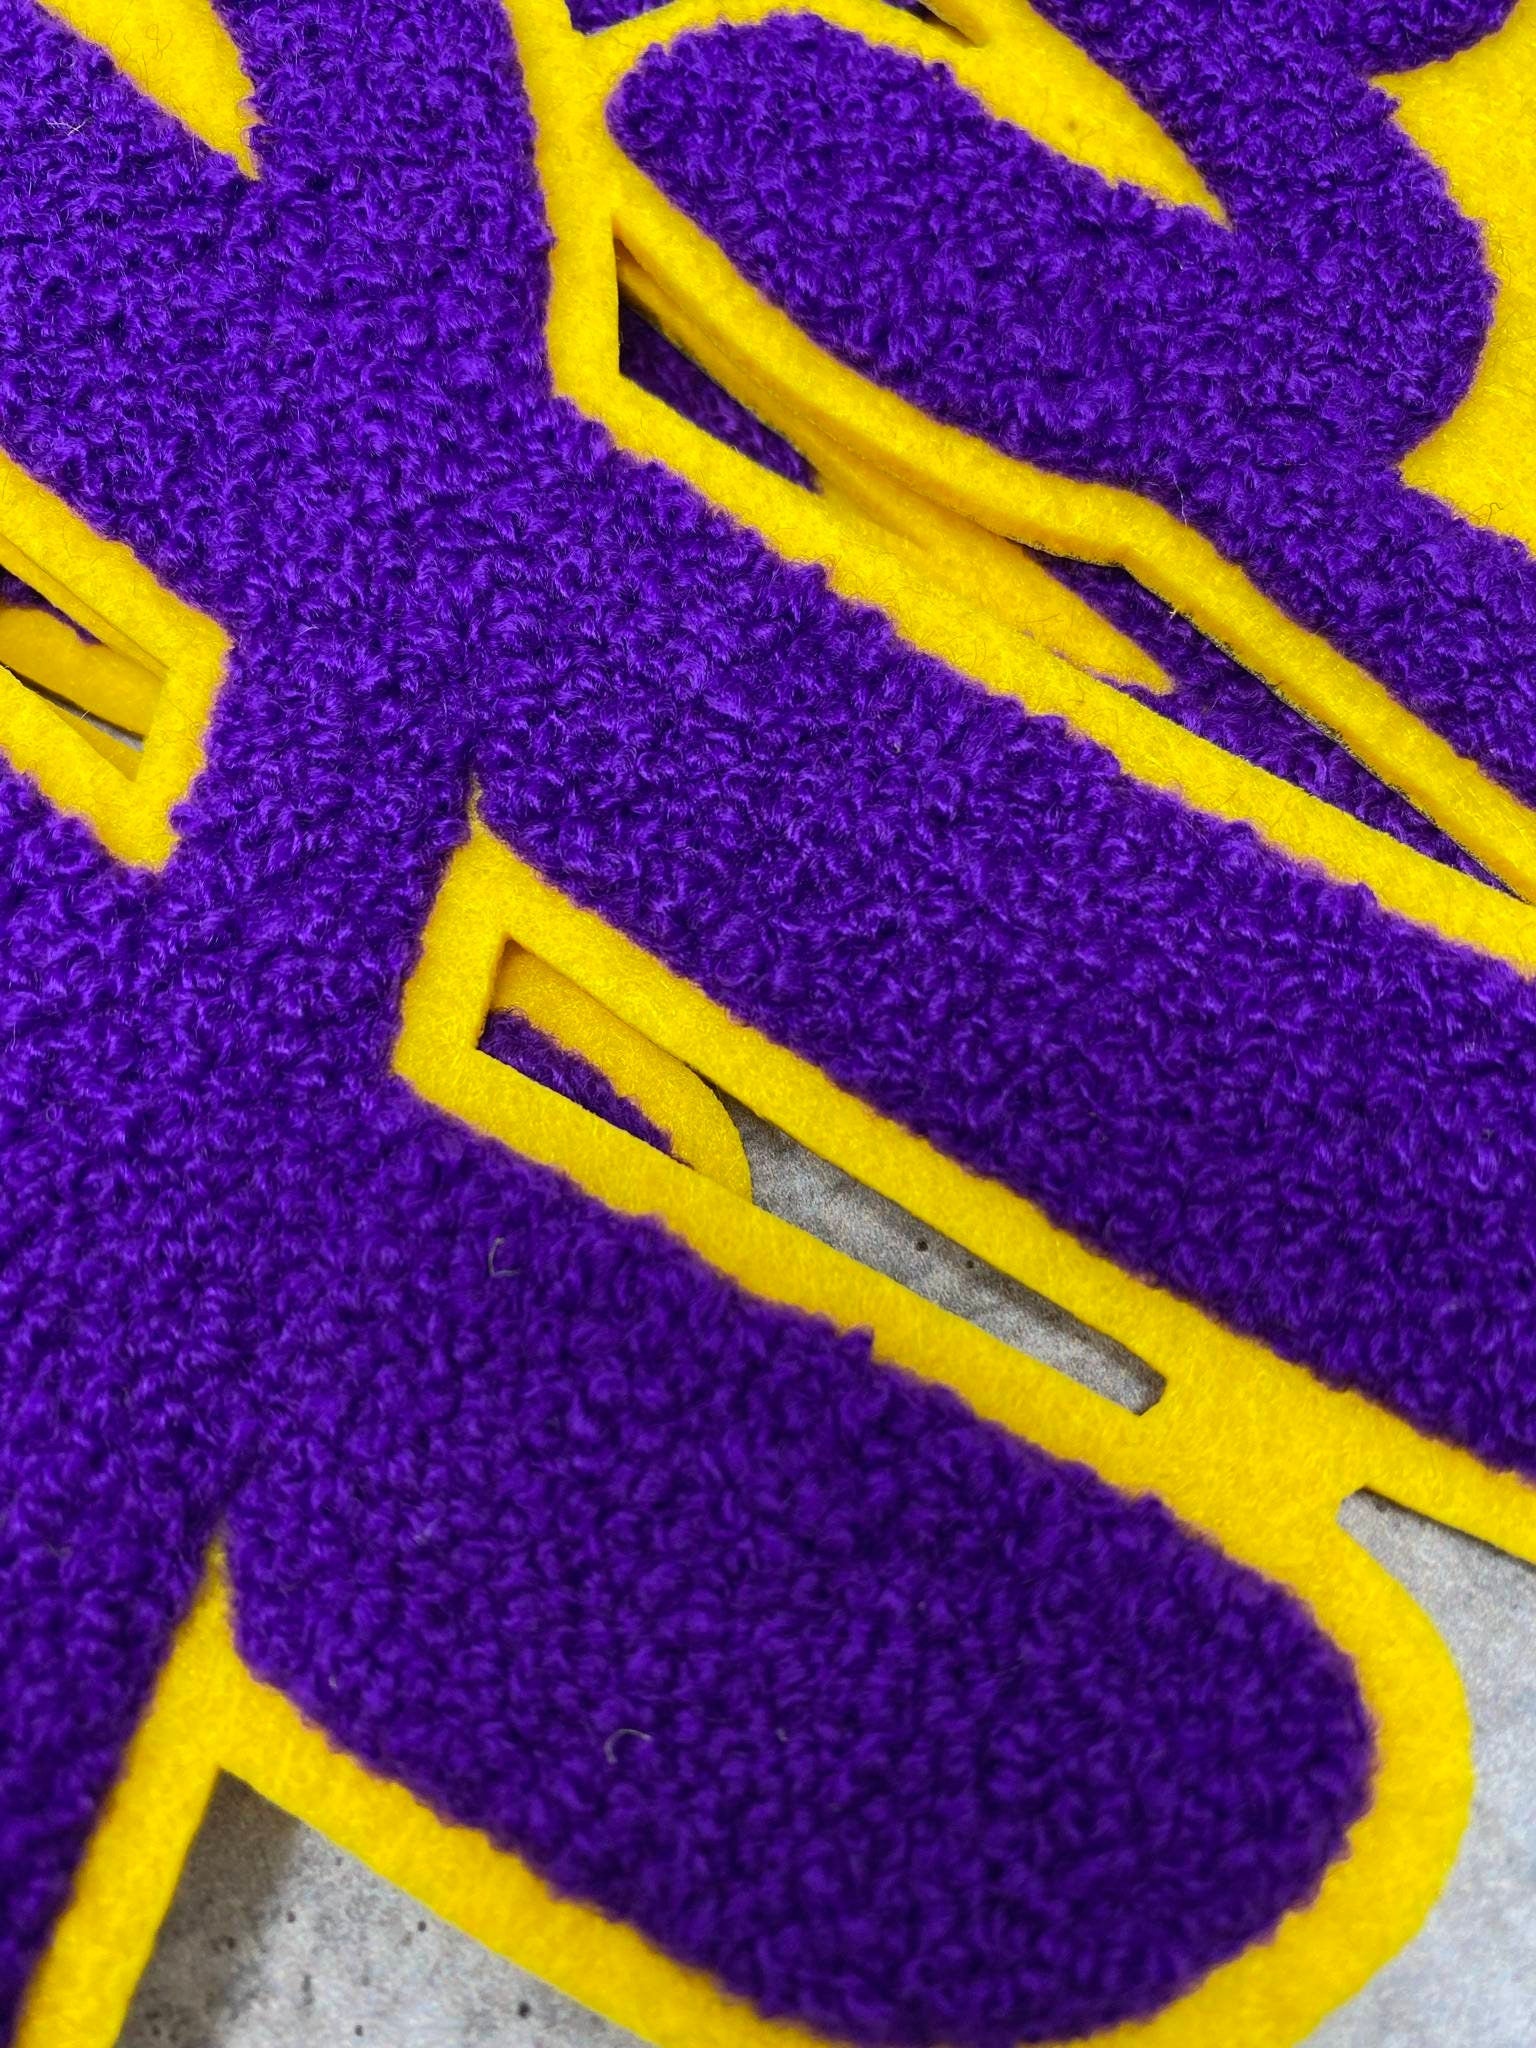 Exclusive, Purple & Gold "Hustle" Chenille Patch (iron-on) Size 10"x8", Varsity Patch for Denim, Shirts and Hoodies, Large Patch